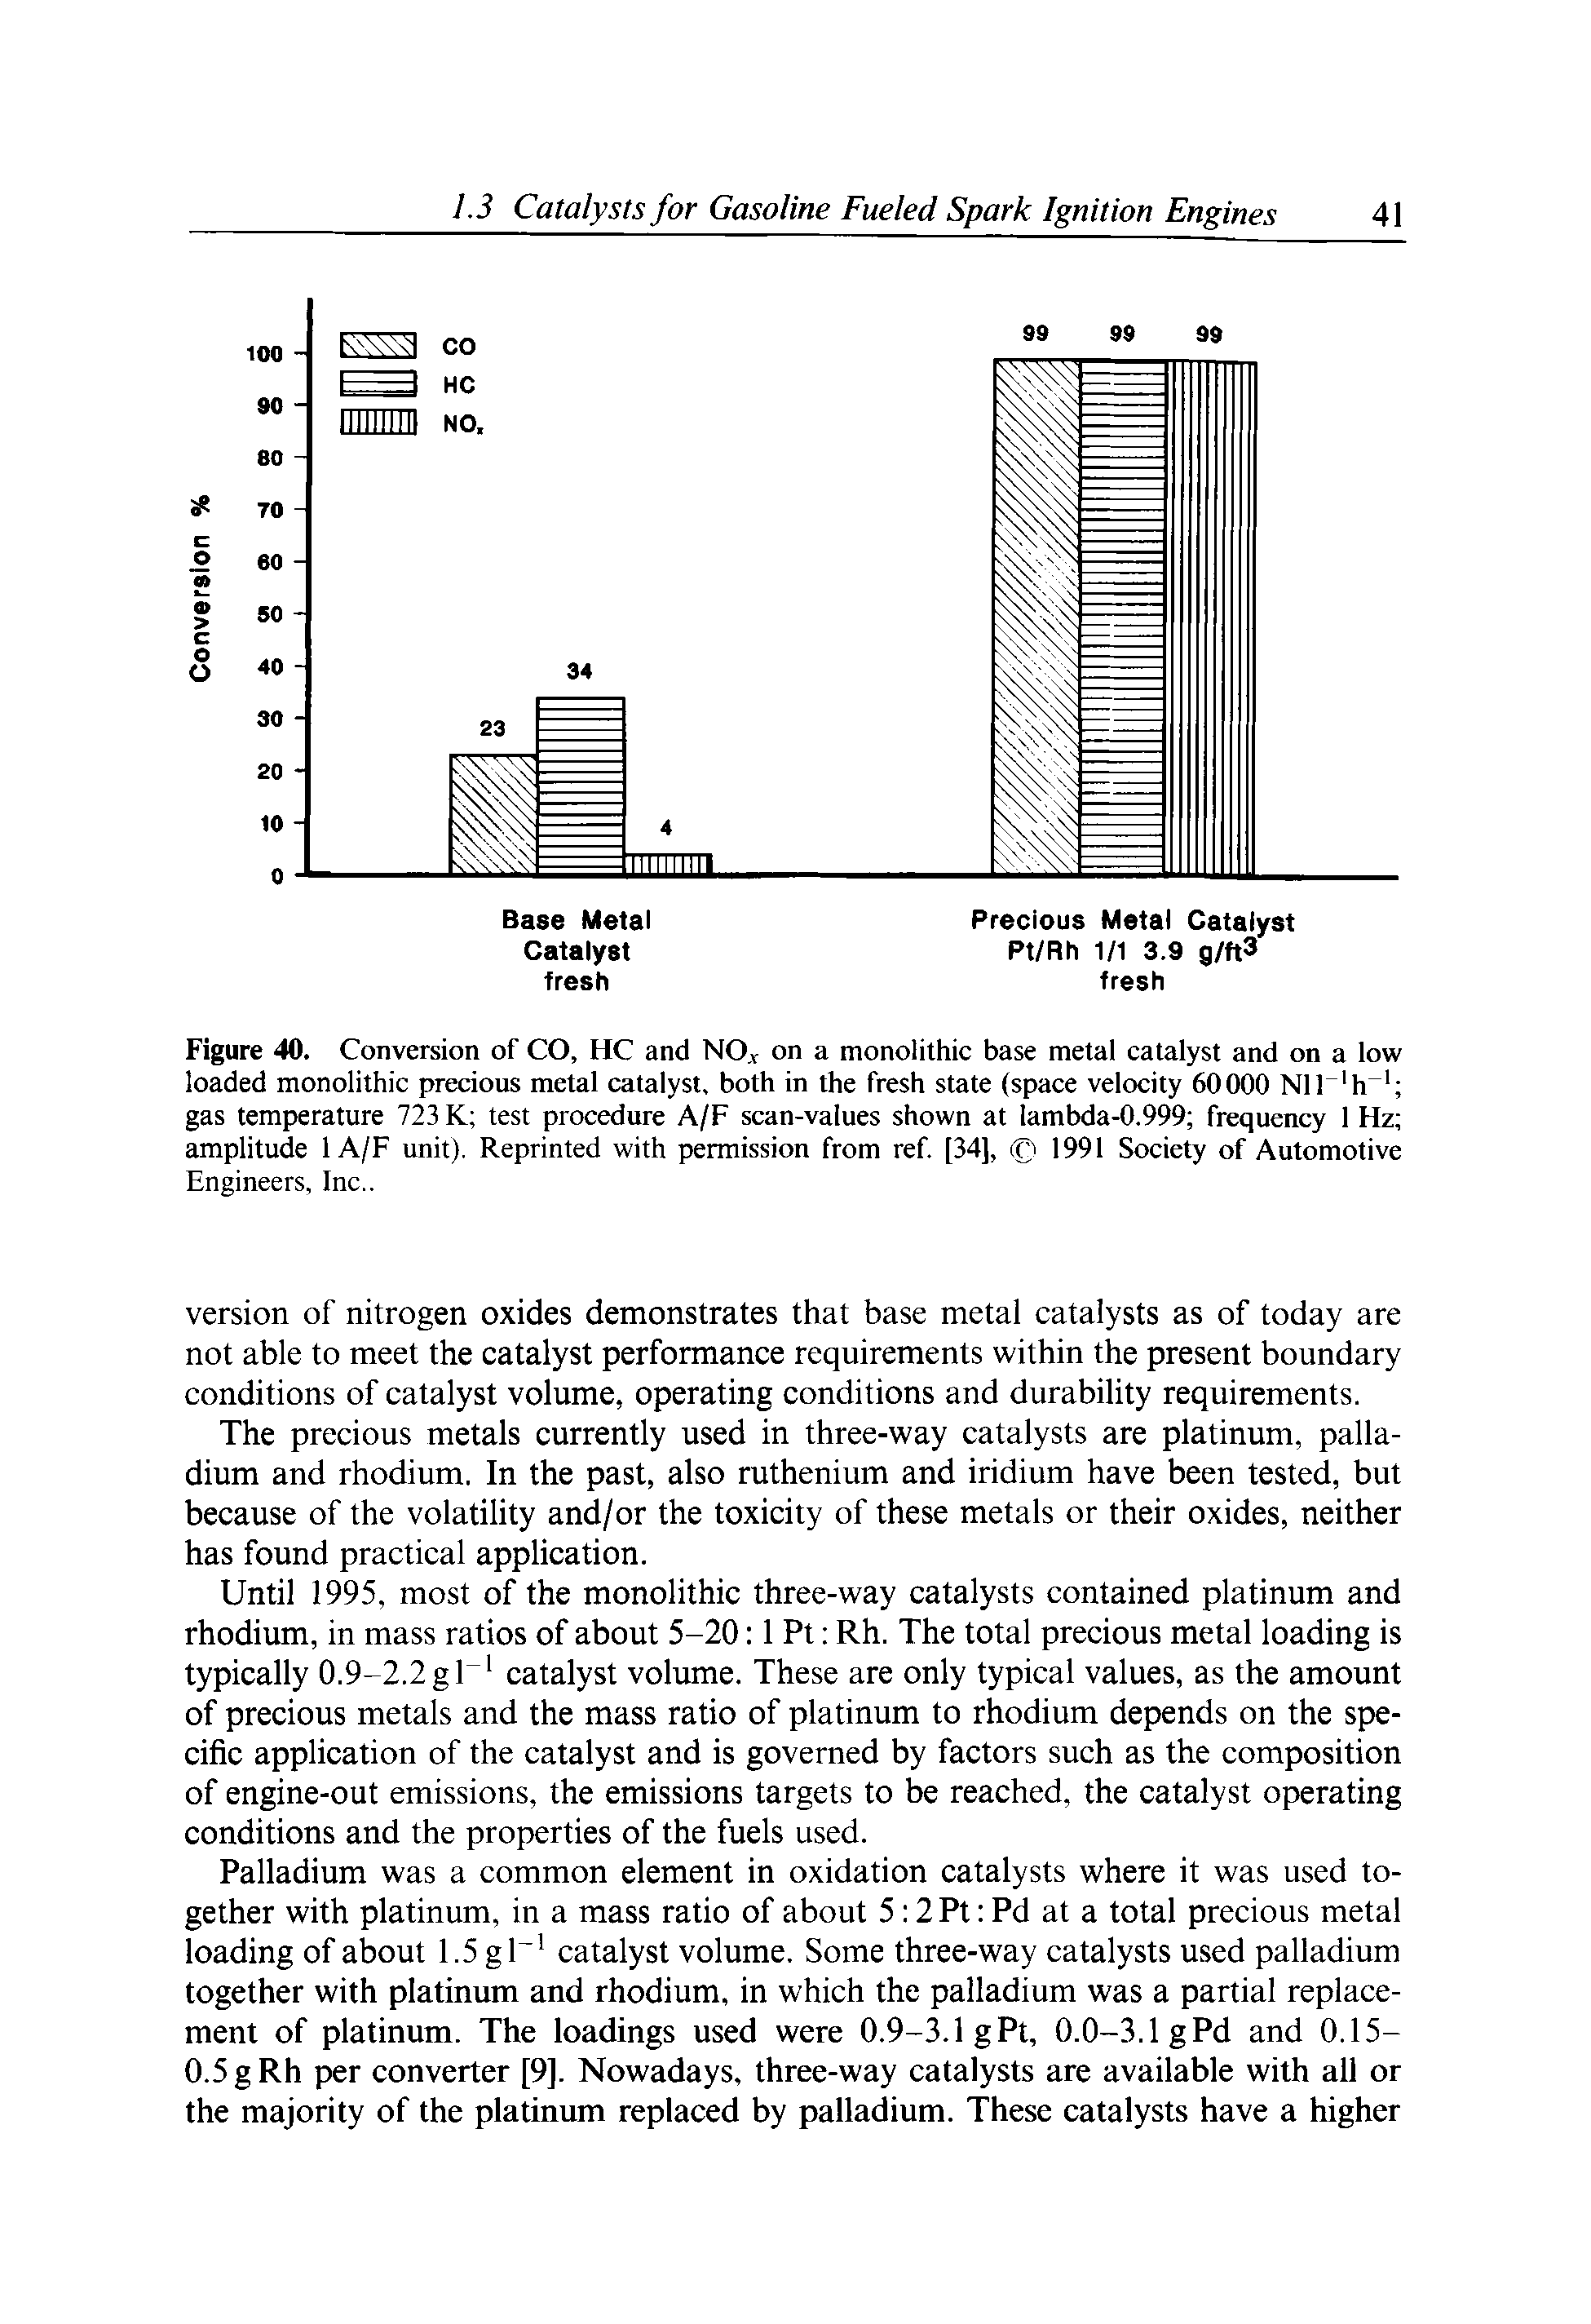 Figure 40. Conversion of CO, HC and NO.v on a monolithic base metal catalyst and on a low loaded monolithic precious metal catalyst, both in the fresh state (space velocity 60000 Nll h gas temperature 723 K test procedure A/F scan-values shown at lambda-0.999 frequency I Hz amplitude 1 A/F unit). Reprinted with permission from ref [34], (f) 1991 Society of Automotive...